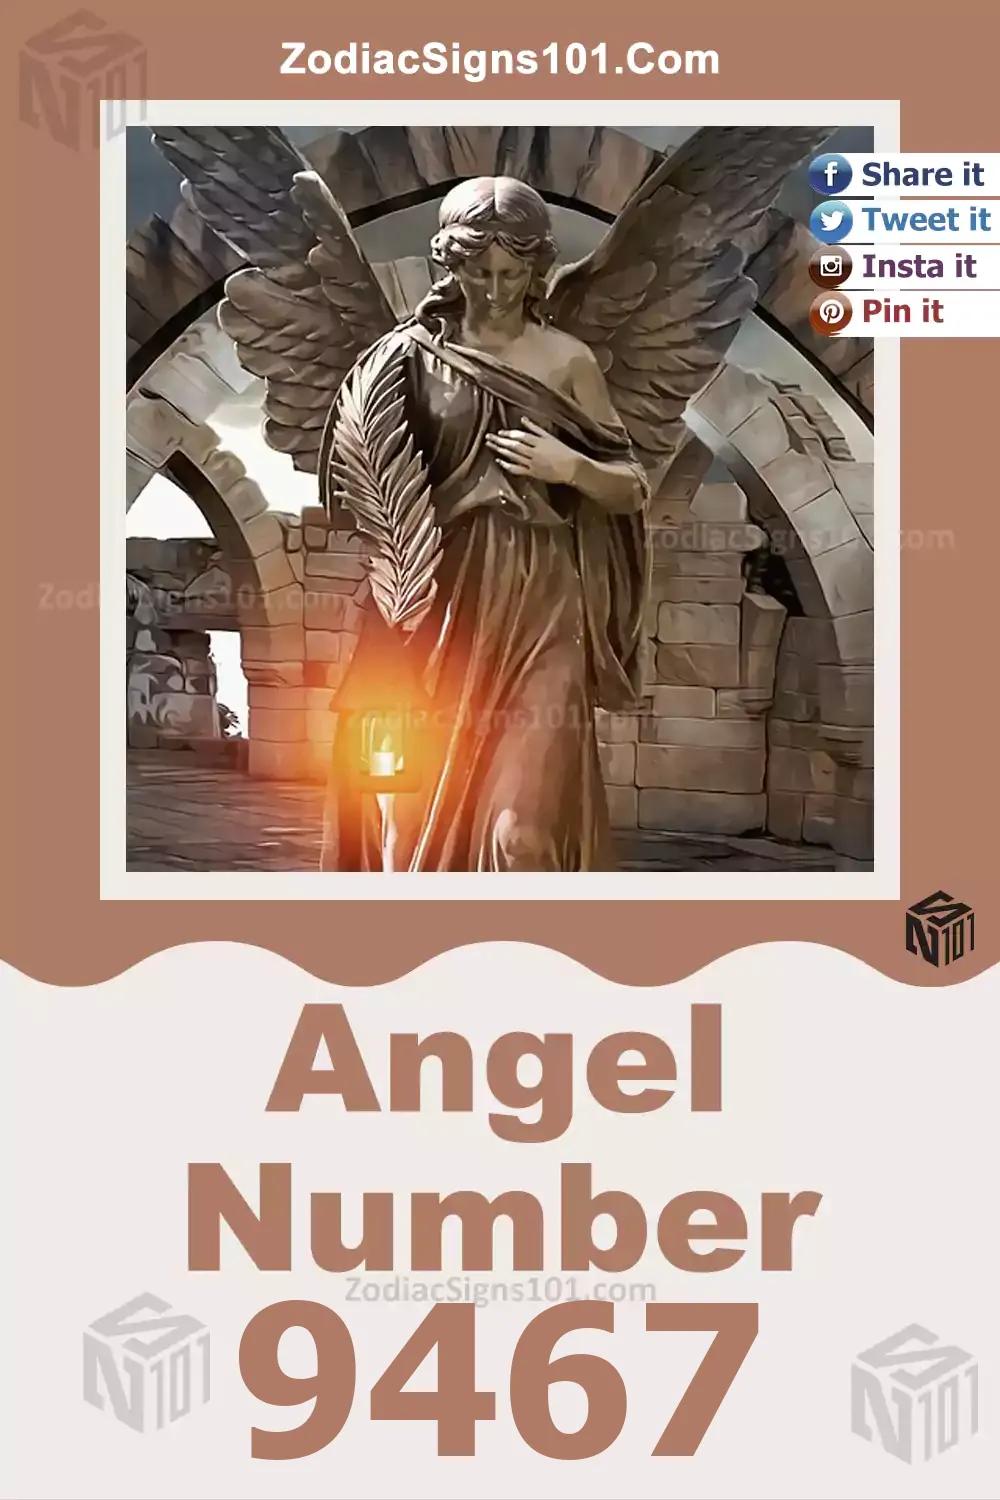 9467 Angel Number Meaning